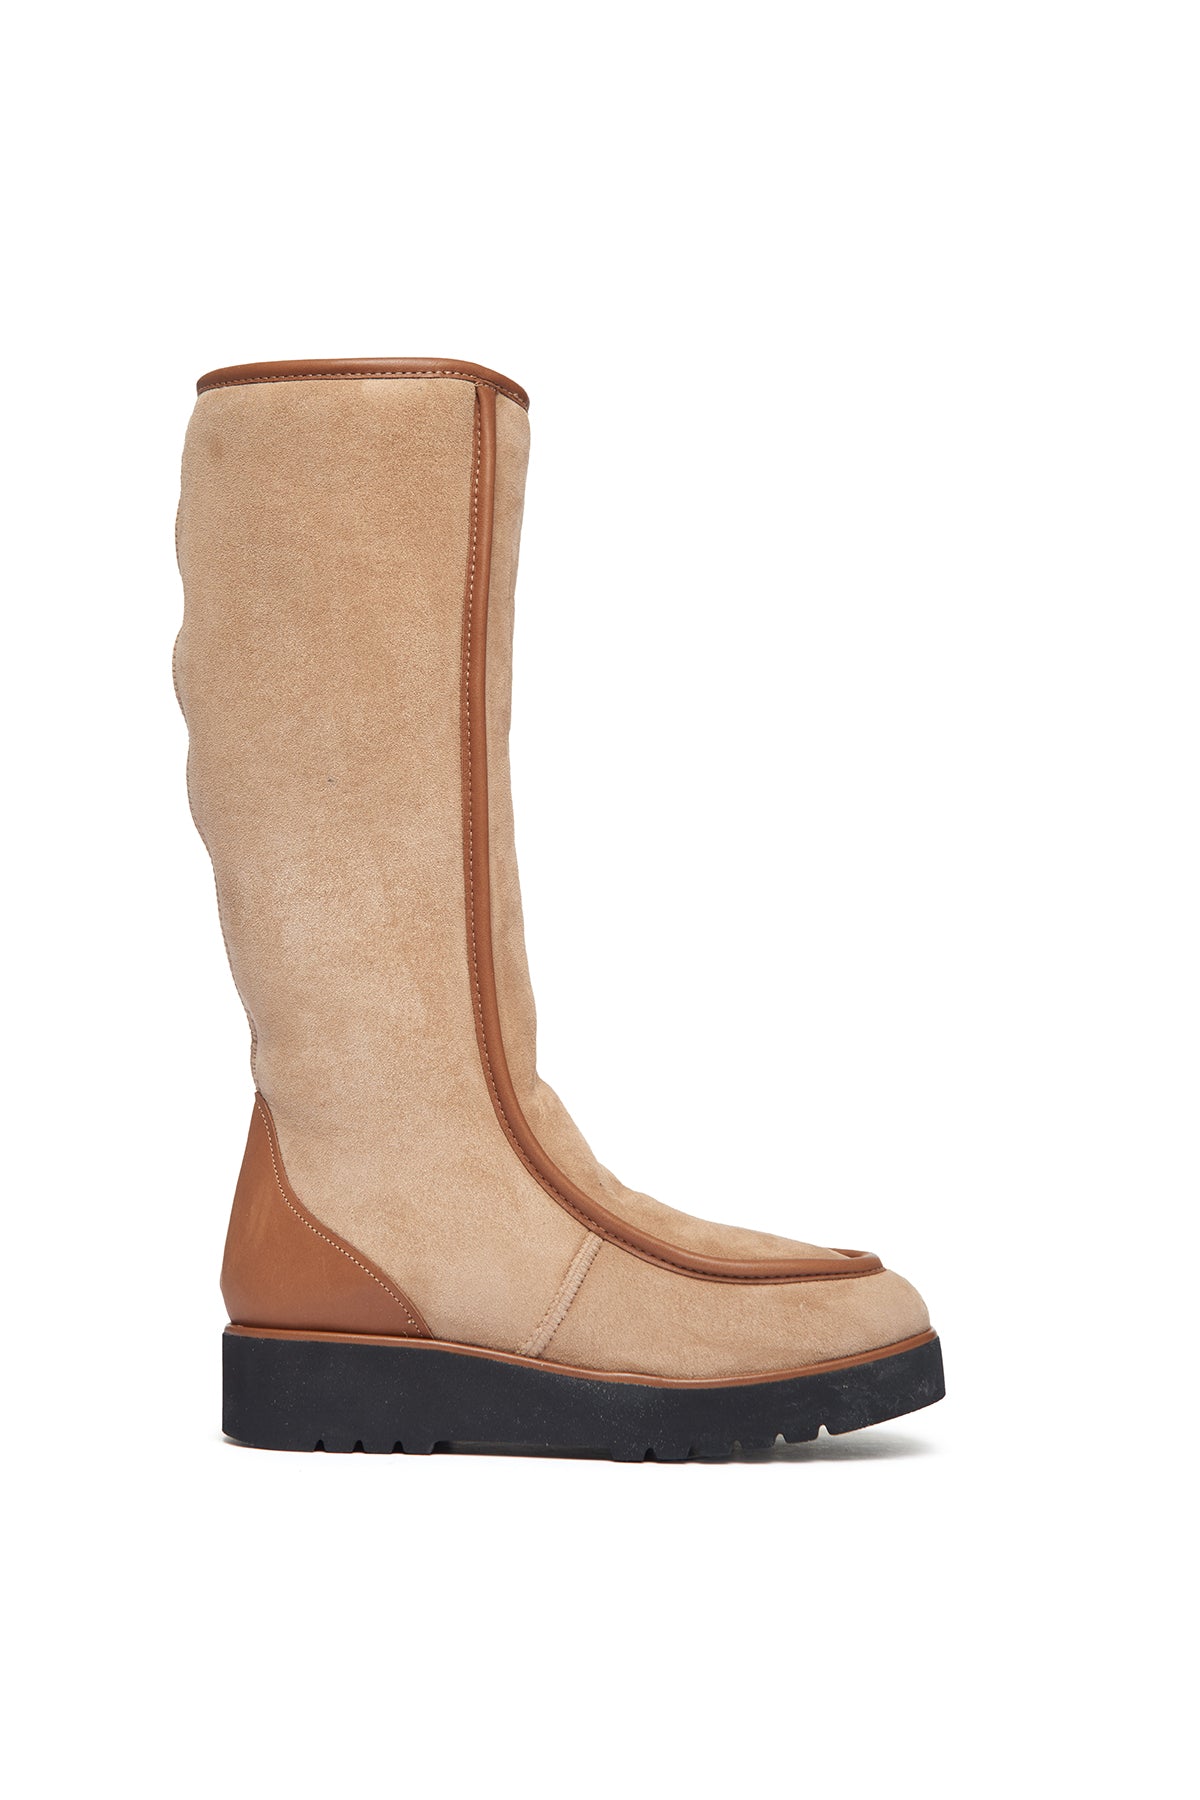 Tayna Flat Boot in Camel Leather